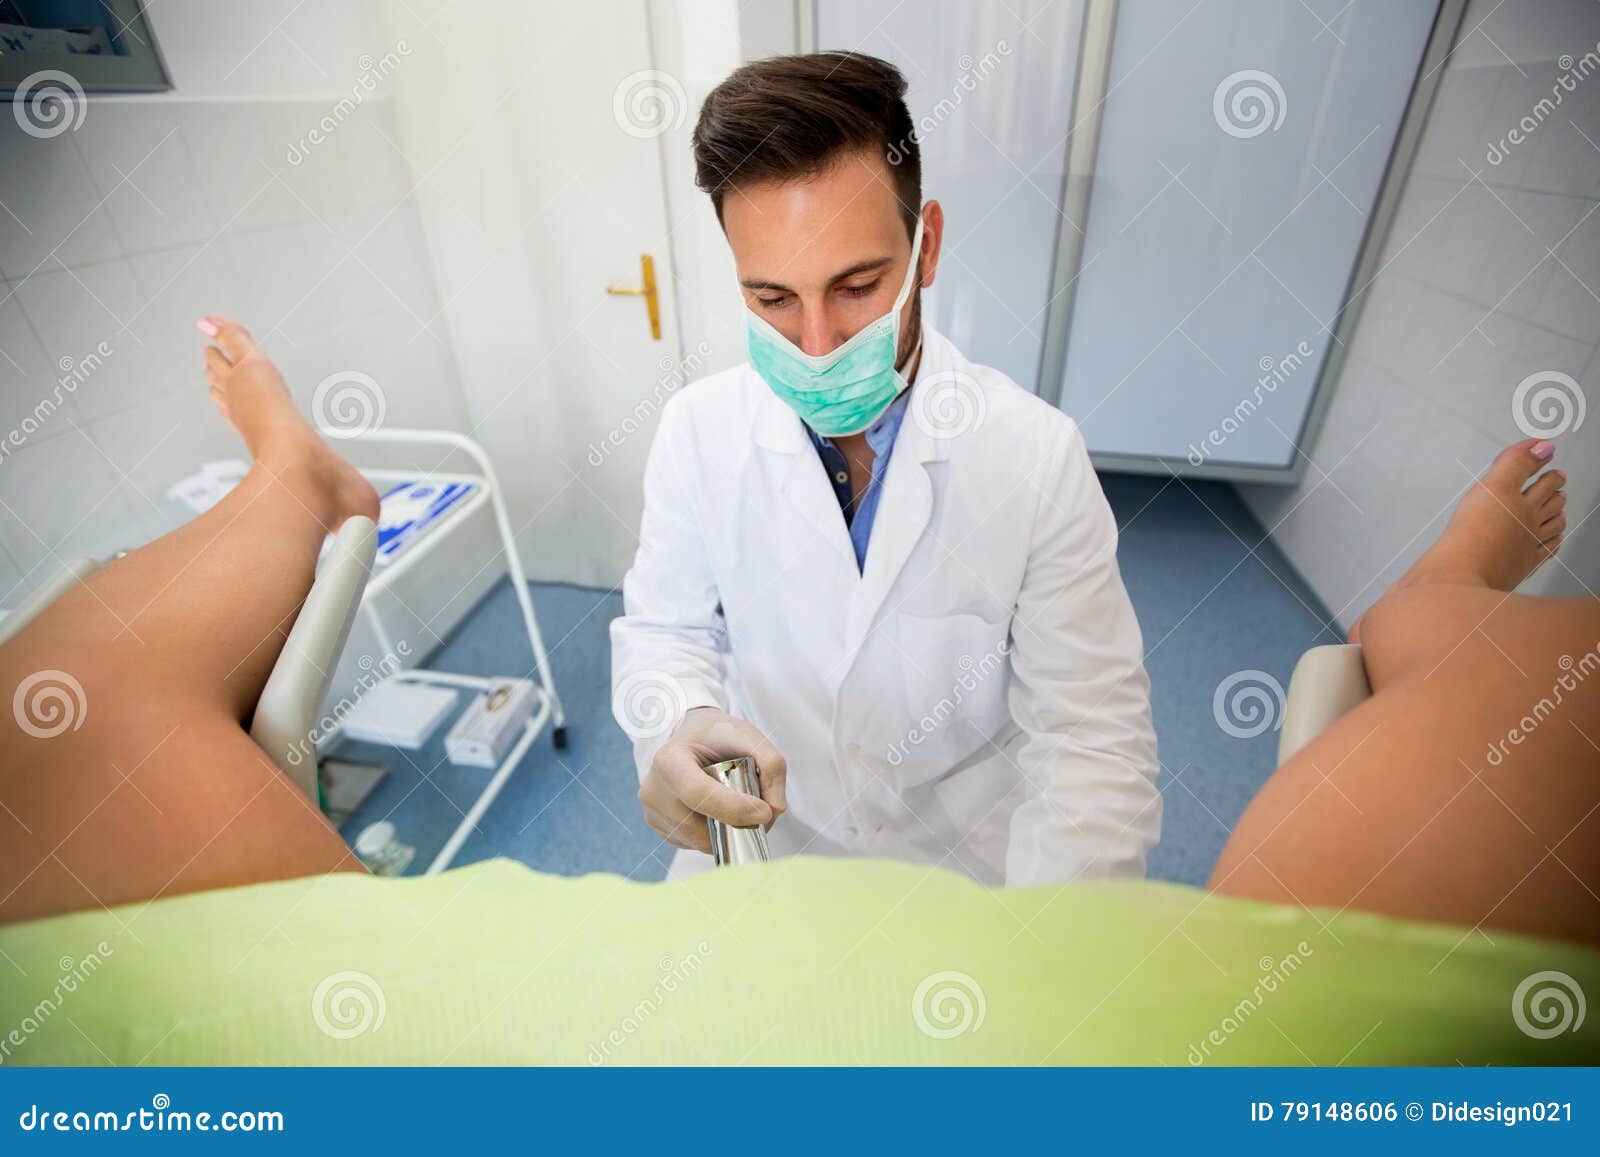 gynecologist examining a patient